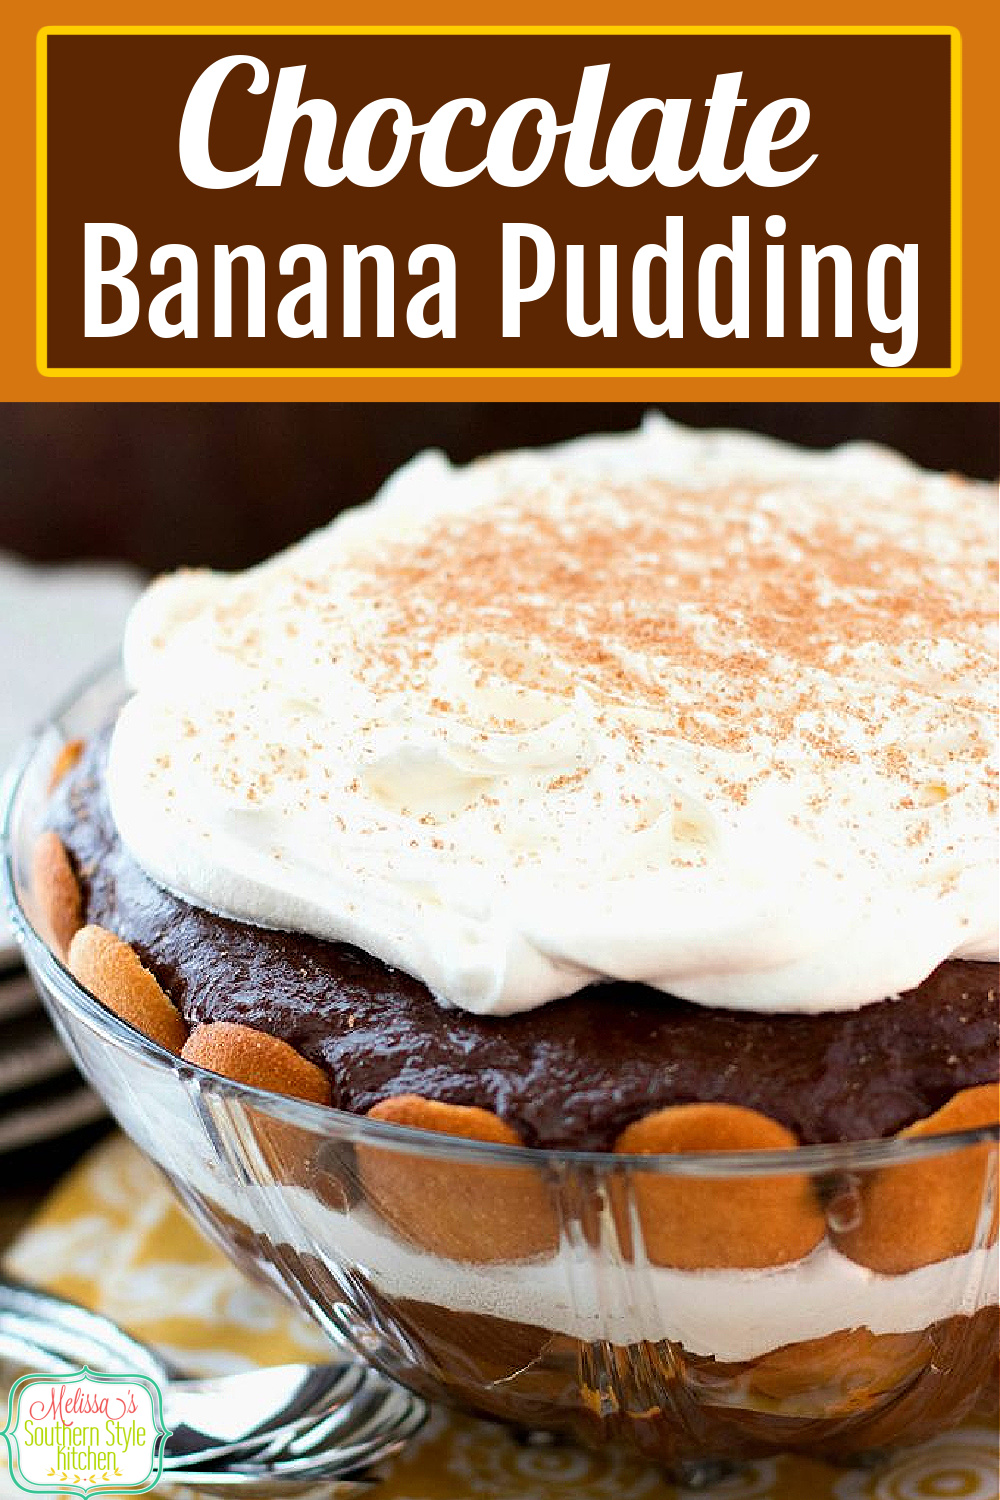 This recipe for Chocolate Banana Pudding turns this Southern classic into a chocolate lovers dream #bananapudding #chocolate #chocolatebananapudding #bananas #chocolatedessertrecipes #southernbananapudding #desserts #southernrecipes via @melissasssk